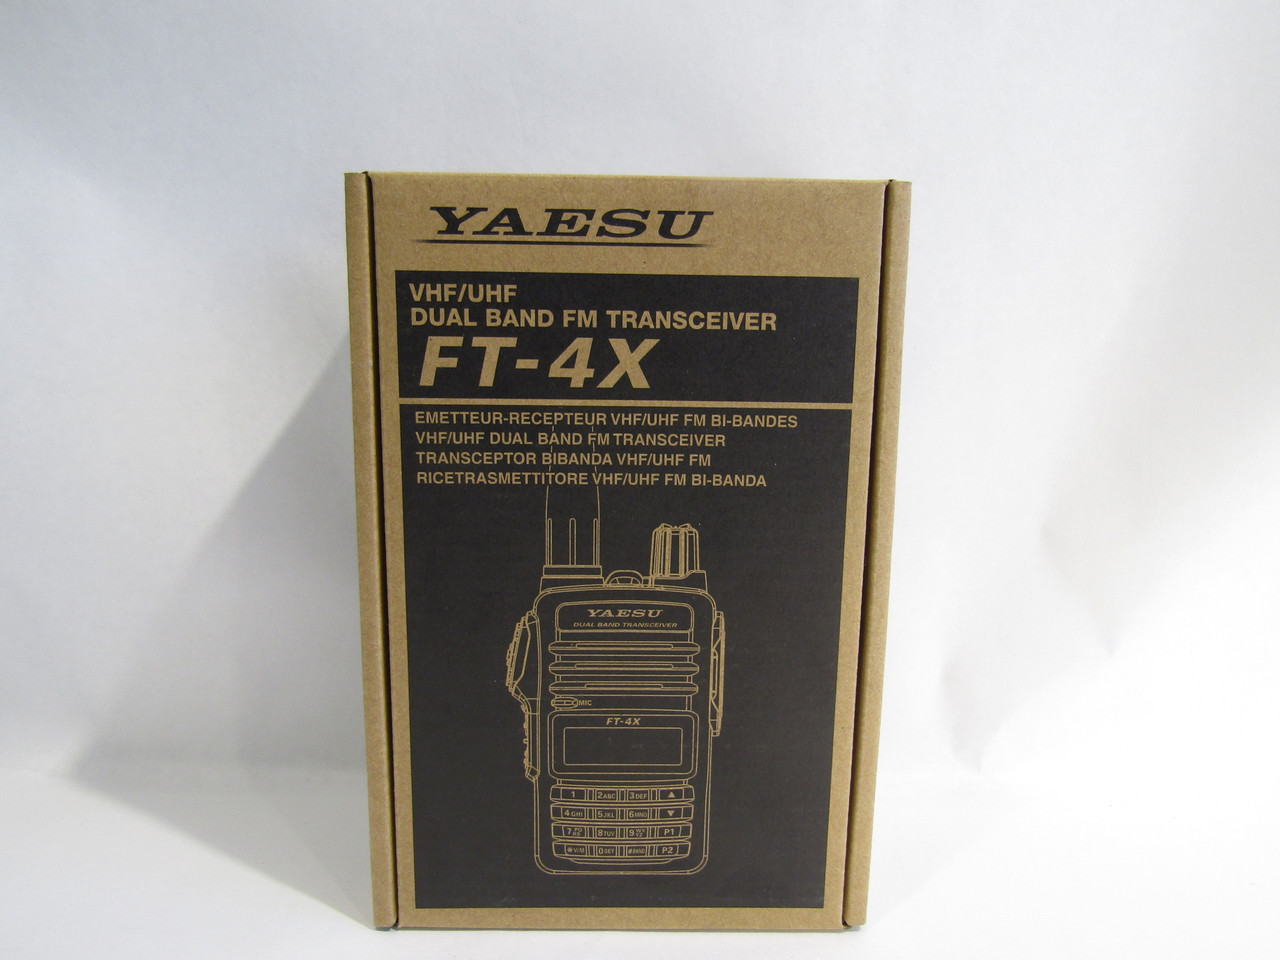 Yaesu FT-4XR Dual Band Hand Held Radio Complete Review 